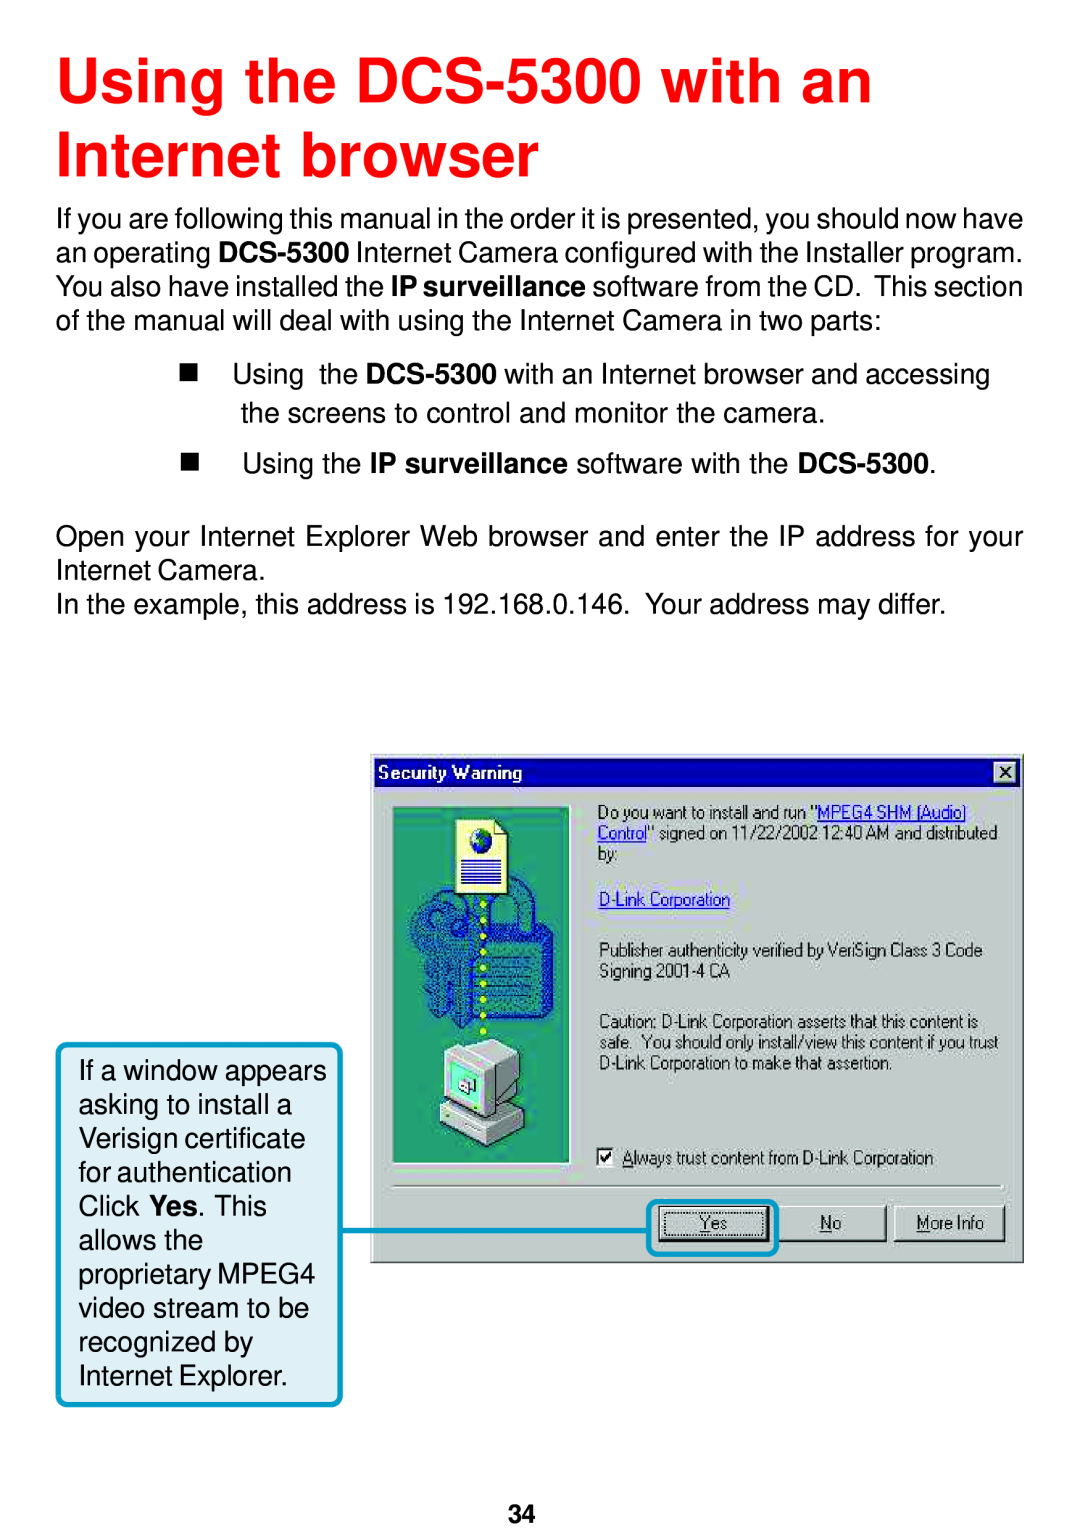 D-Link manual Using the DCS-5300 with an Internet browser 